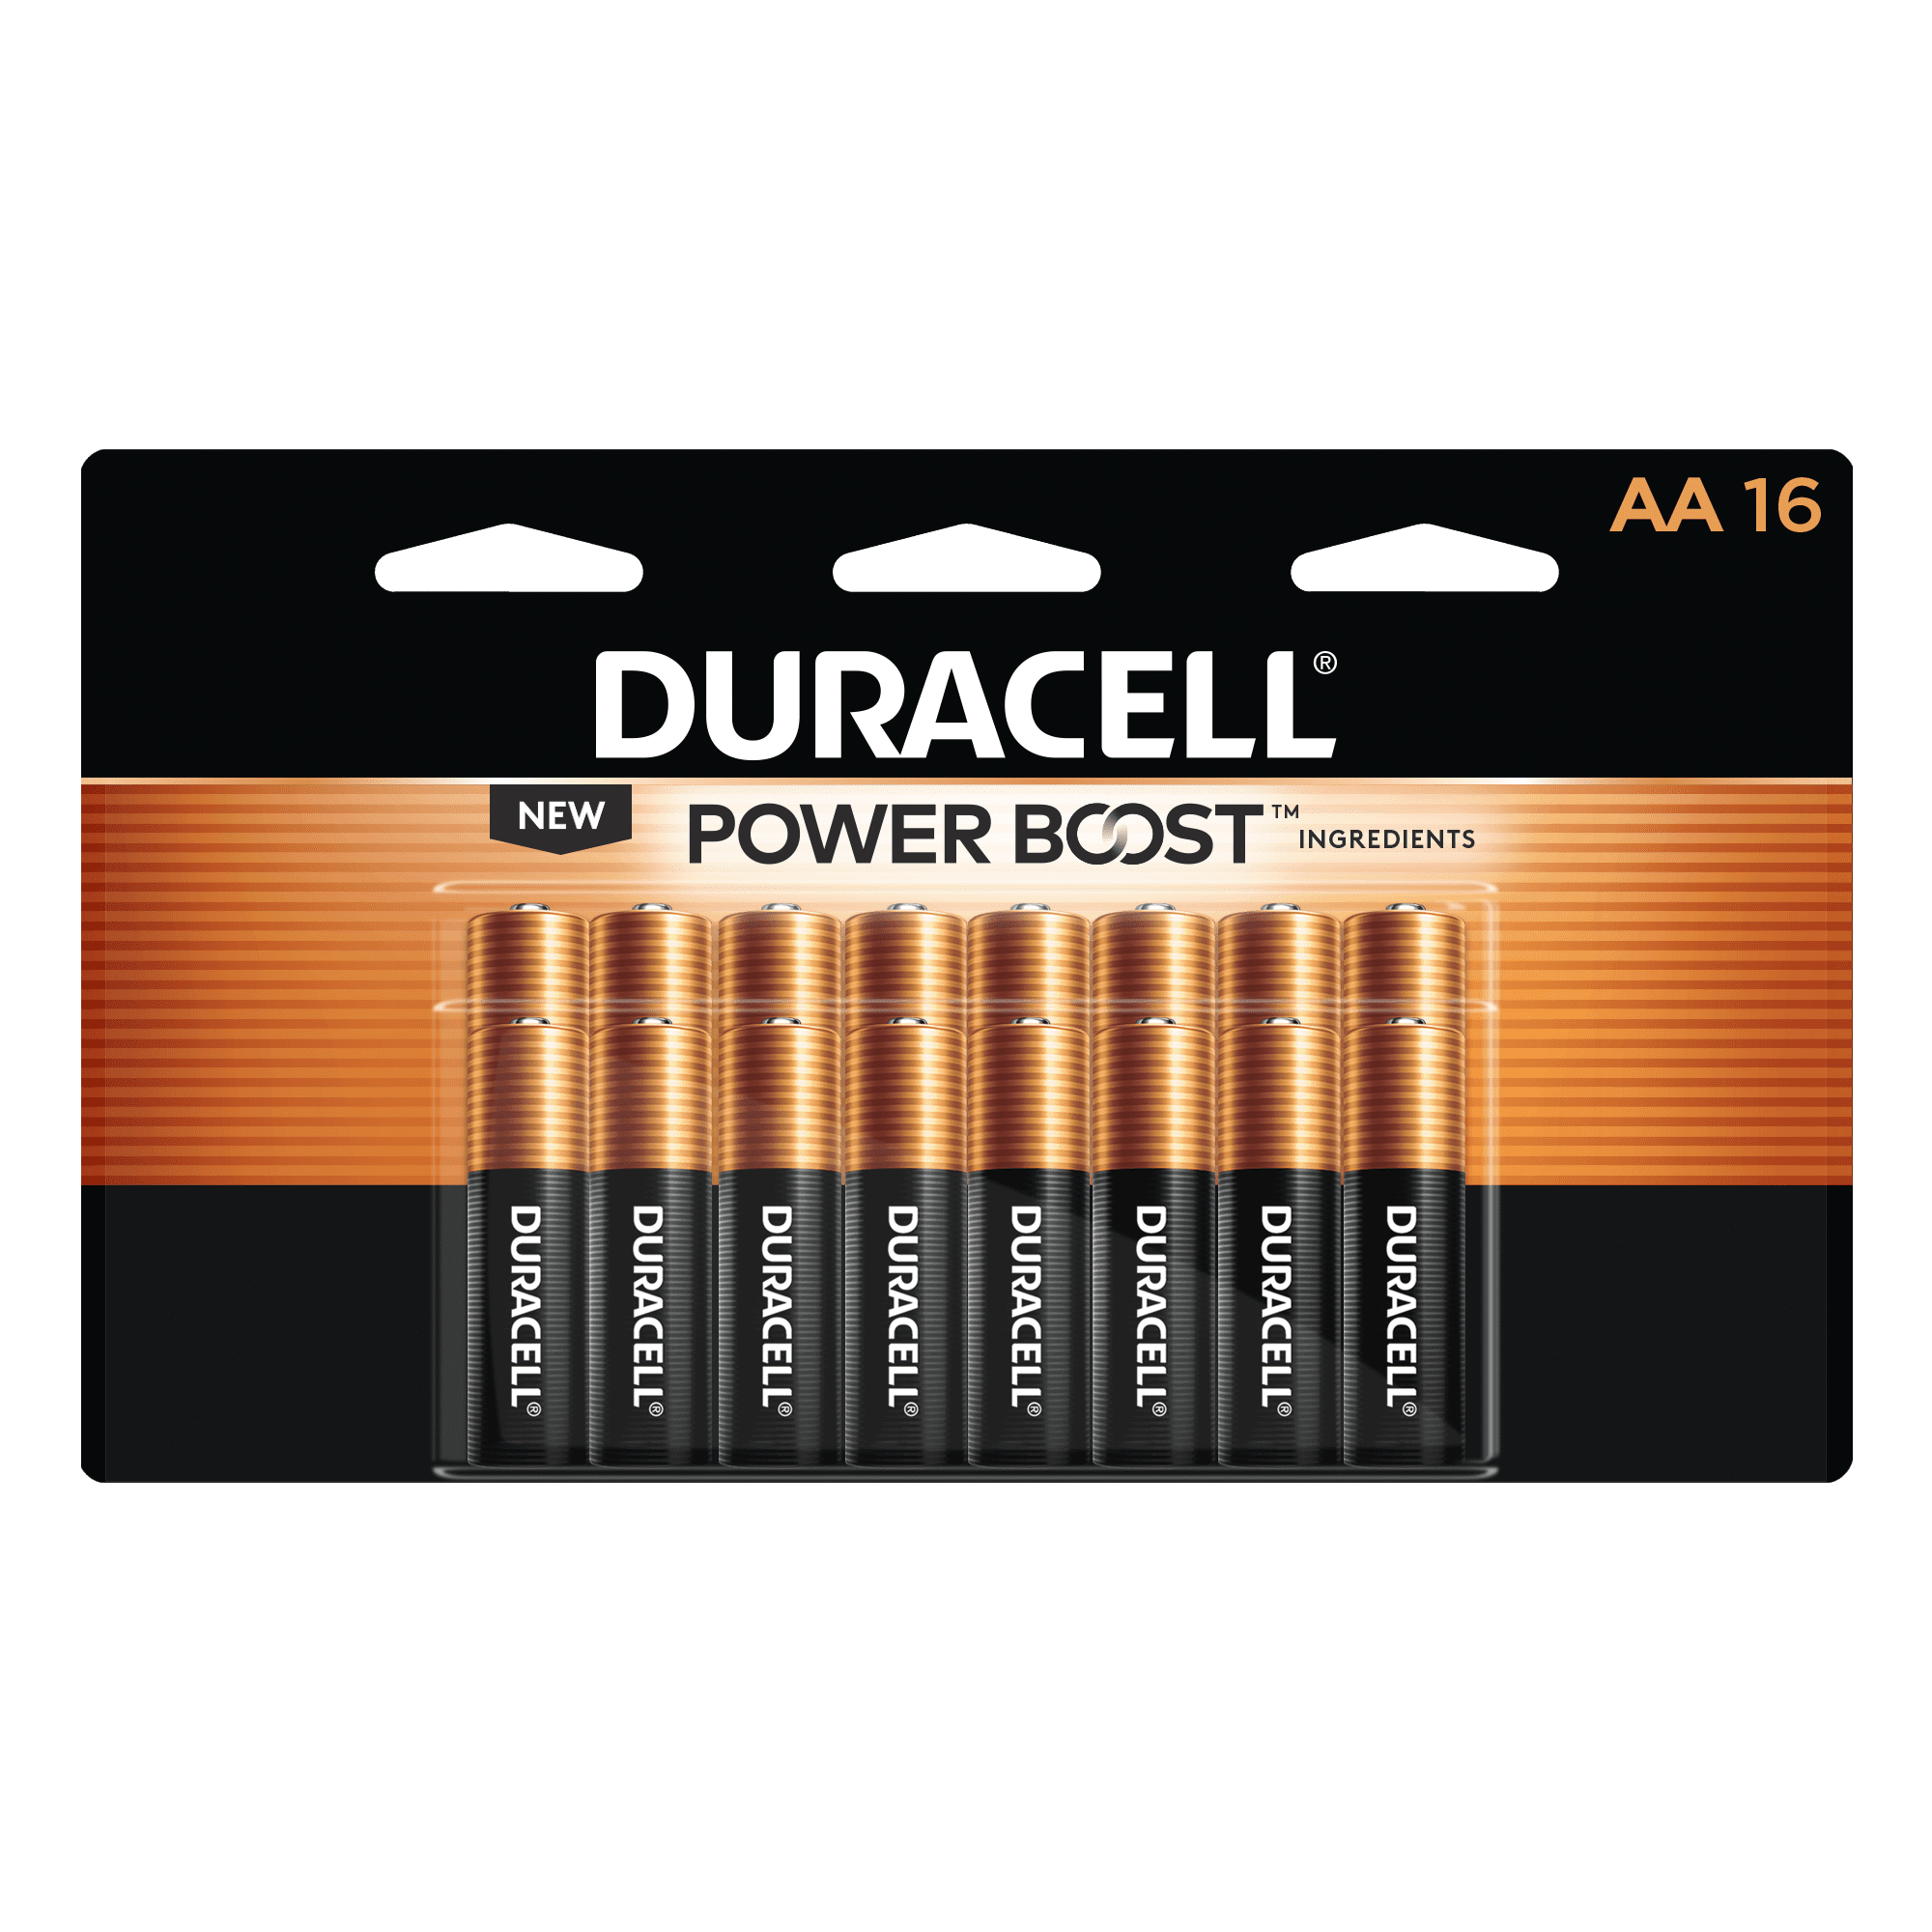 16er Pack Packing May Vary Duracell MN 1500 Ultra Power B16 Alkaline AA Batteries